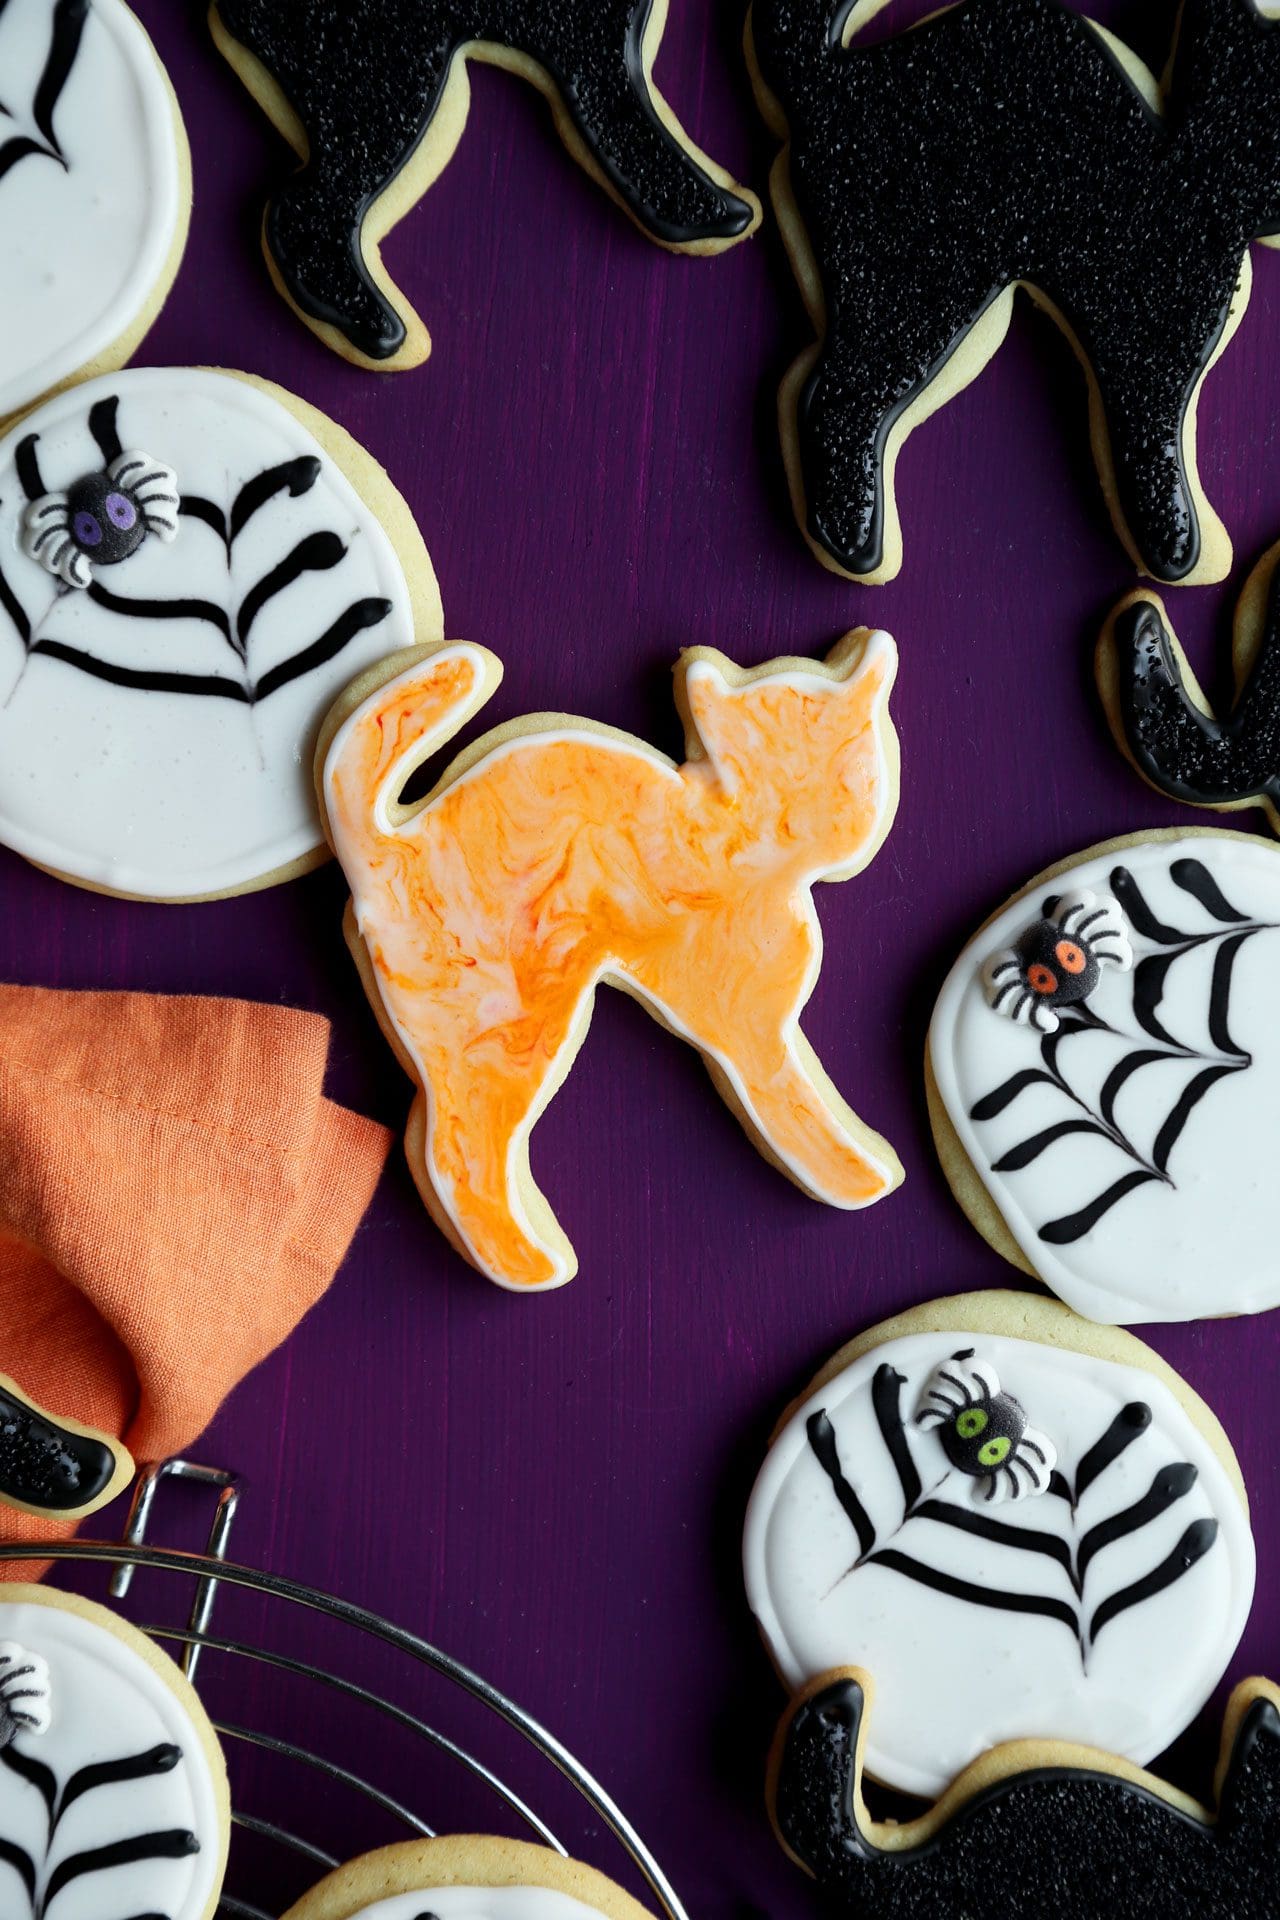 Best Halloween Cake Pans and Cookie Cutters for 2021